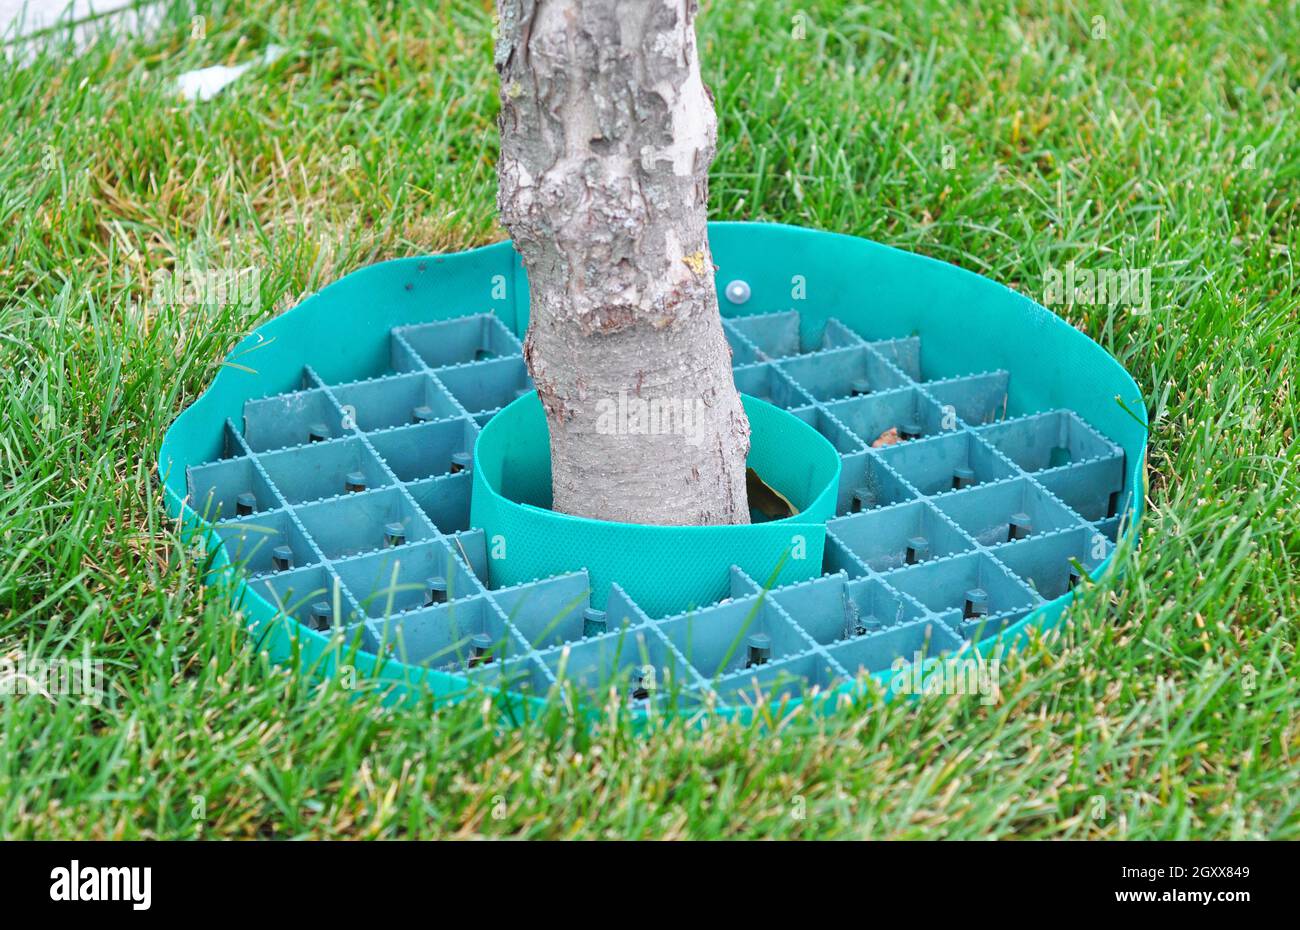 Tree rubber roud for better rain and watering drain tree roots. Stock Photo